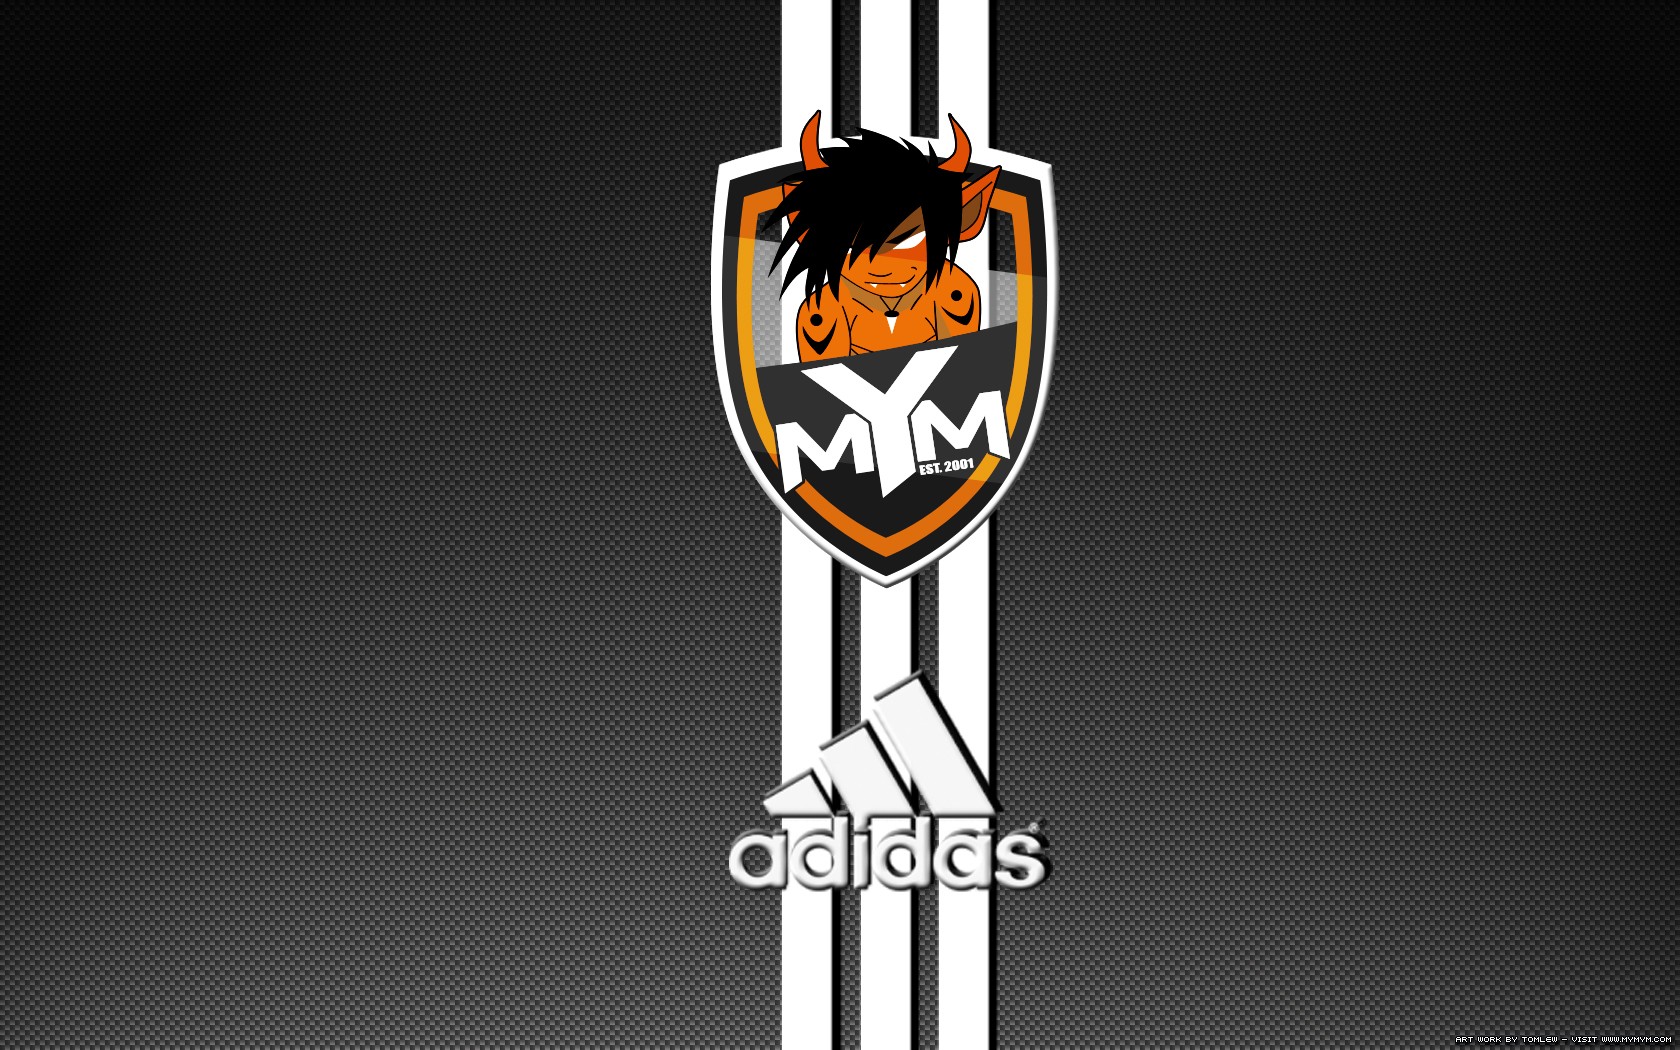 General 1680x1050 Meet Your Makers Adidas logo horns texture gray background brand PC gaming